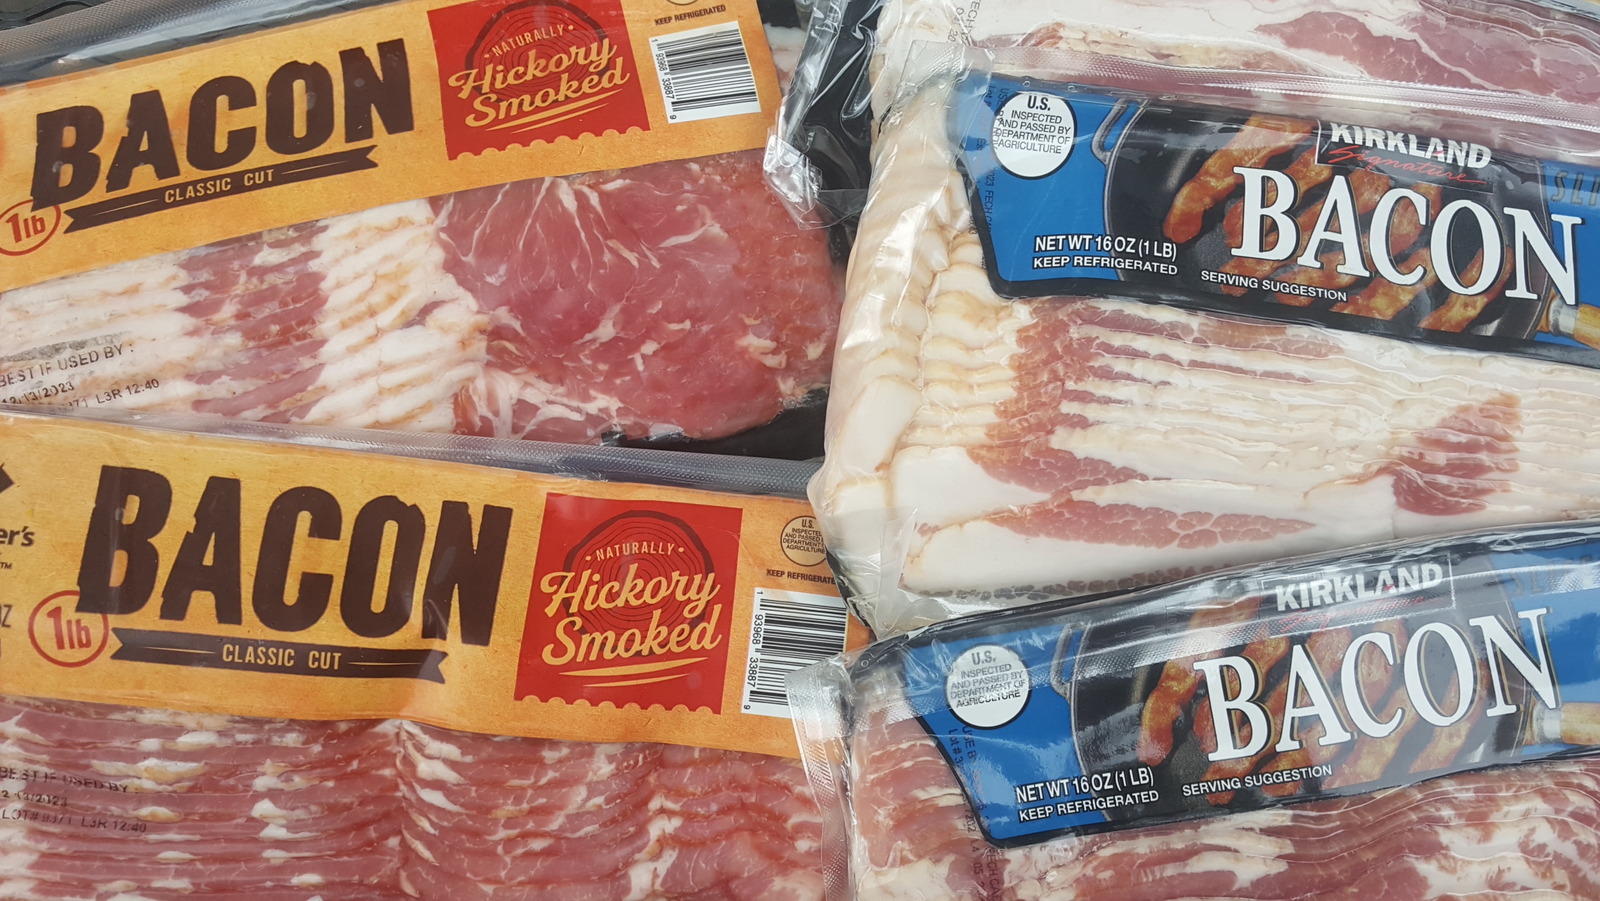 Member's Mark Bacon Vs Kirkland Bacon: Which One Should You Buy?